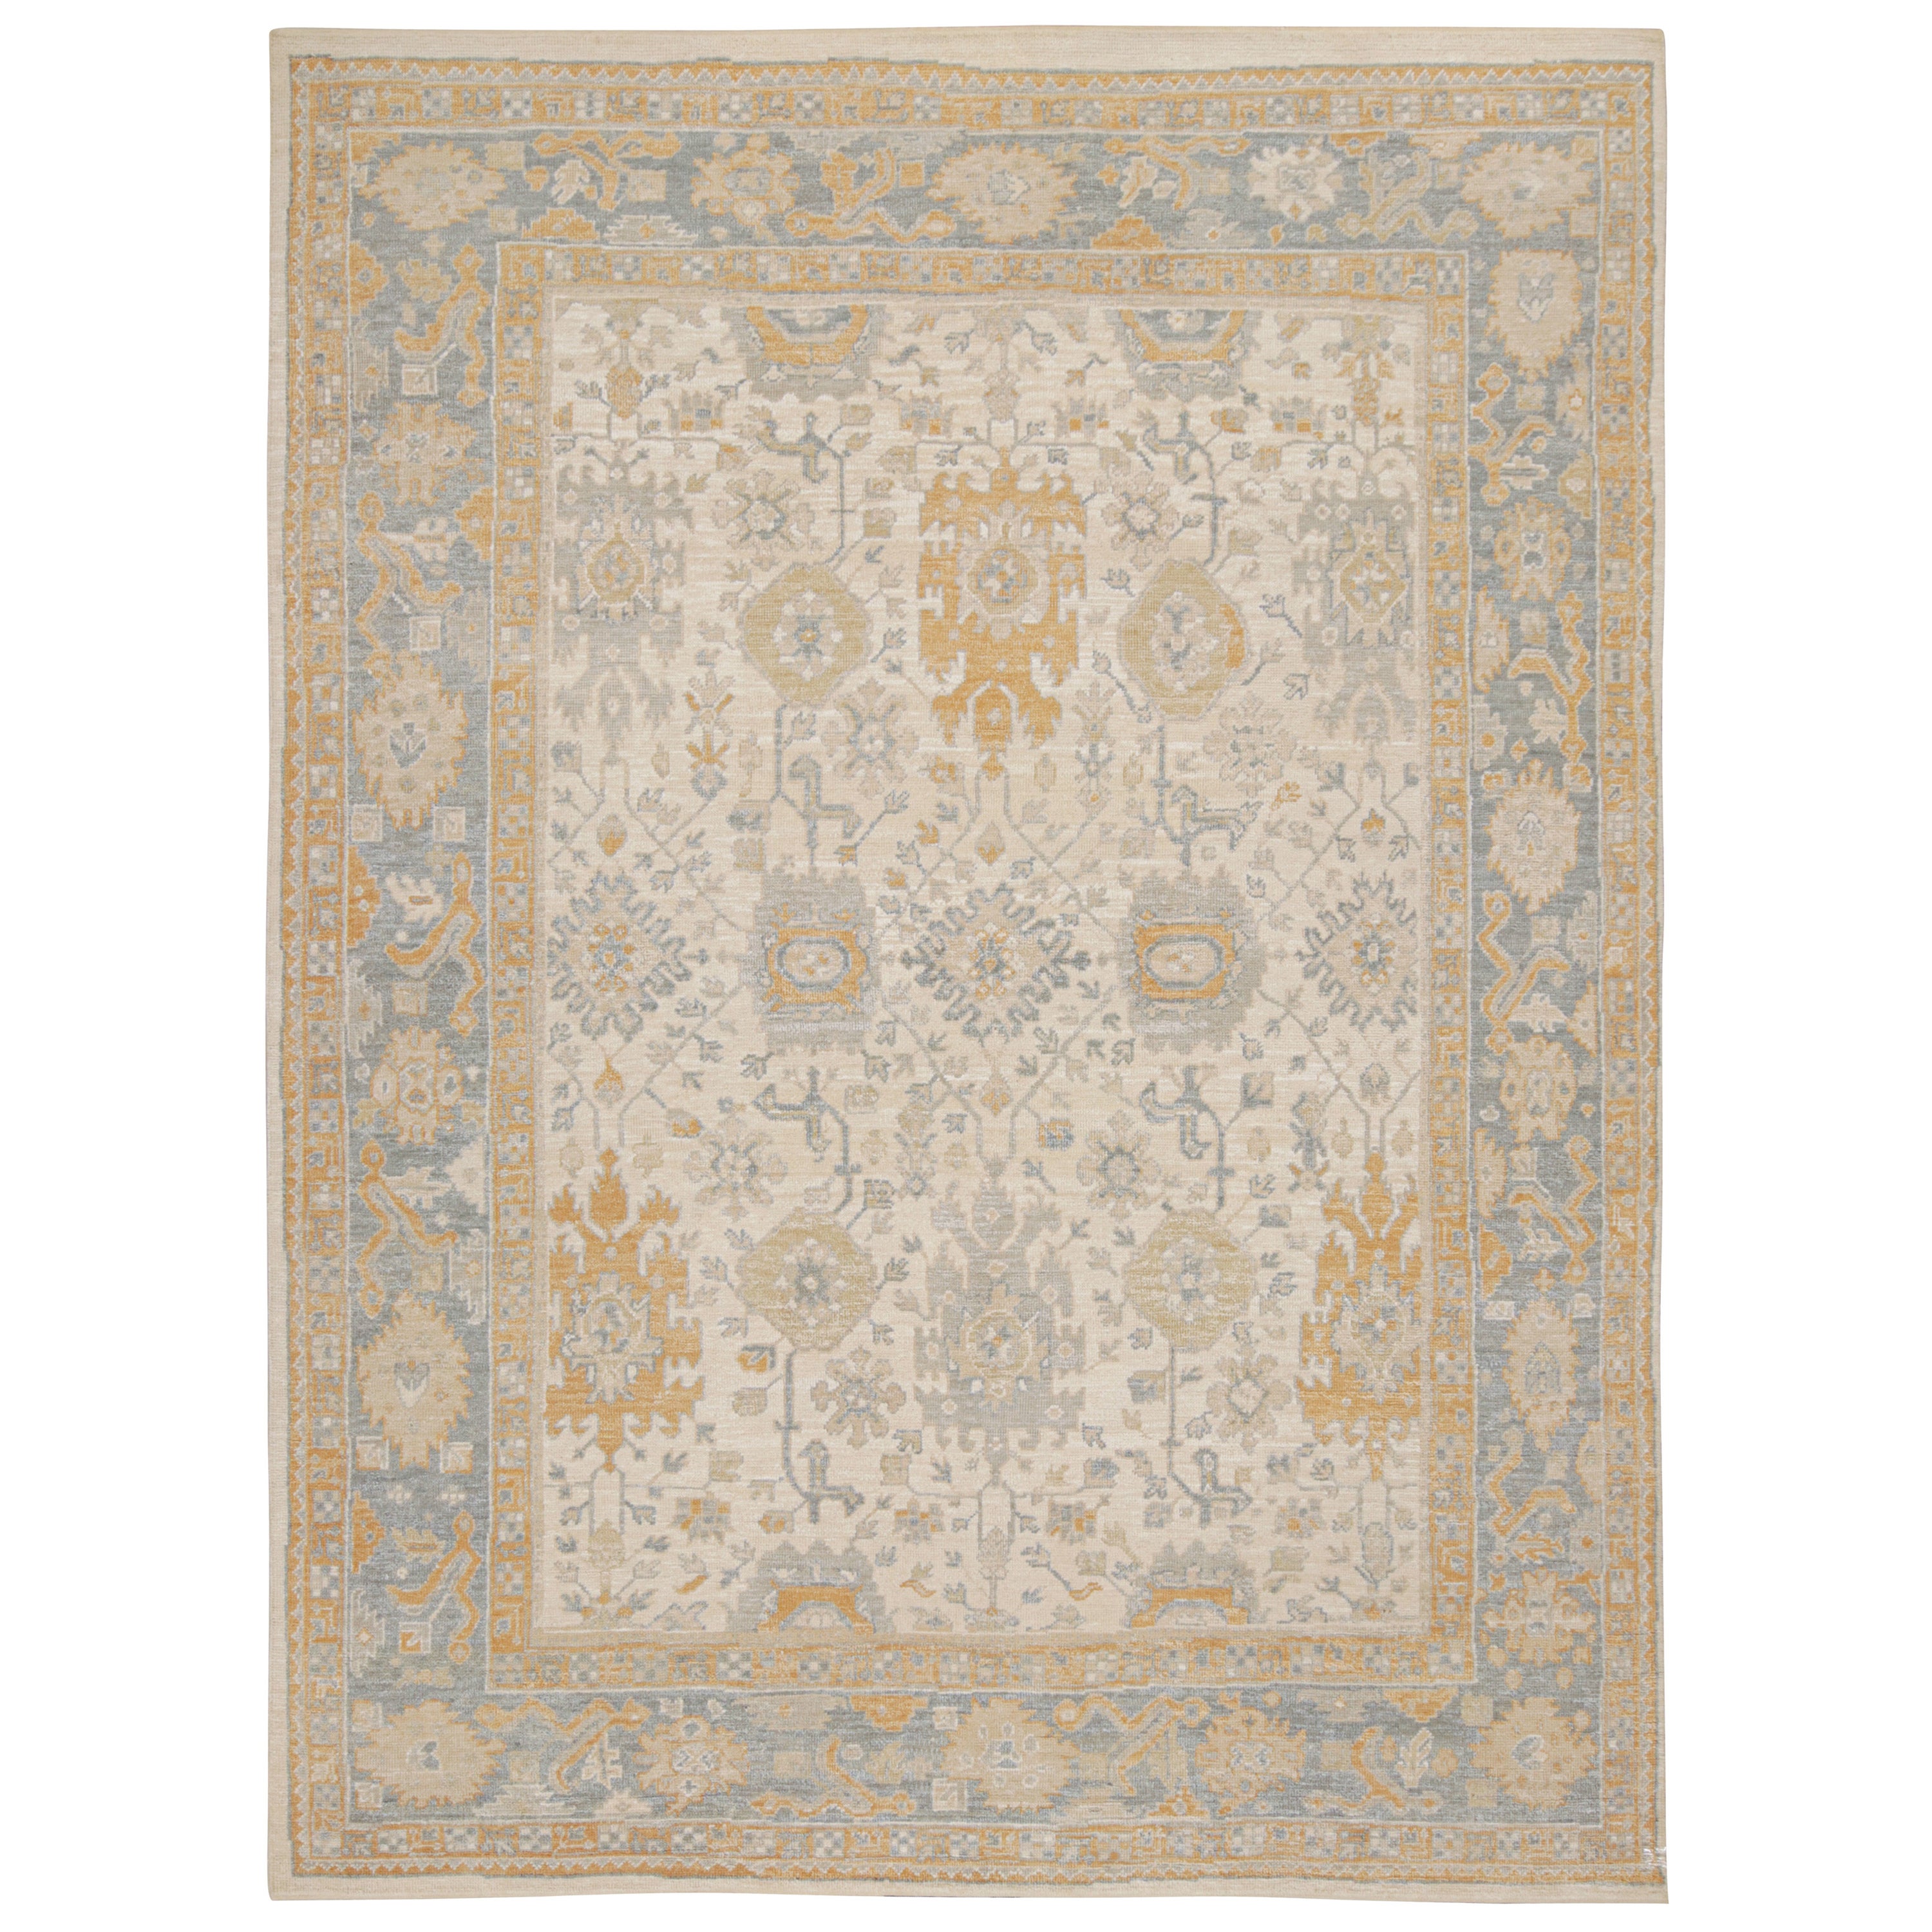 Rug & Kilim’s Oushak Style Rug in Beige, Gold and Blue Floral Patterns